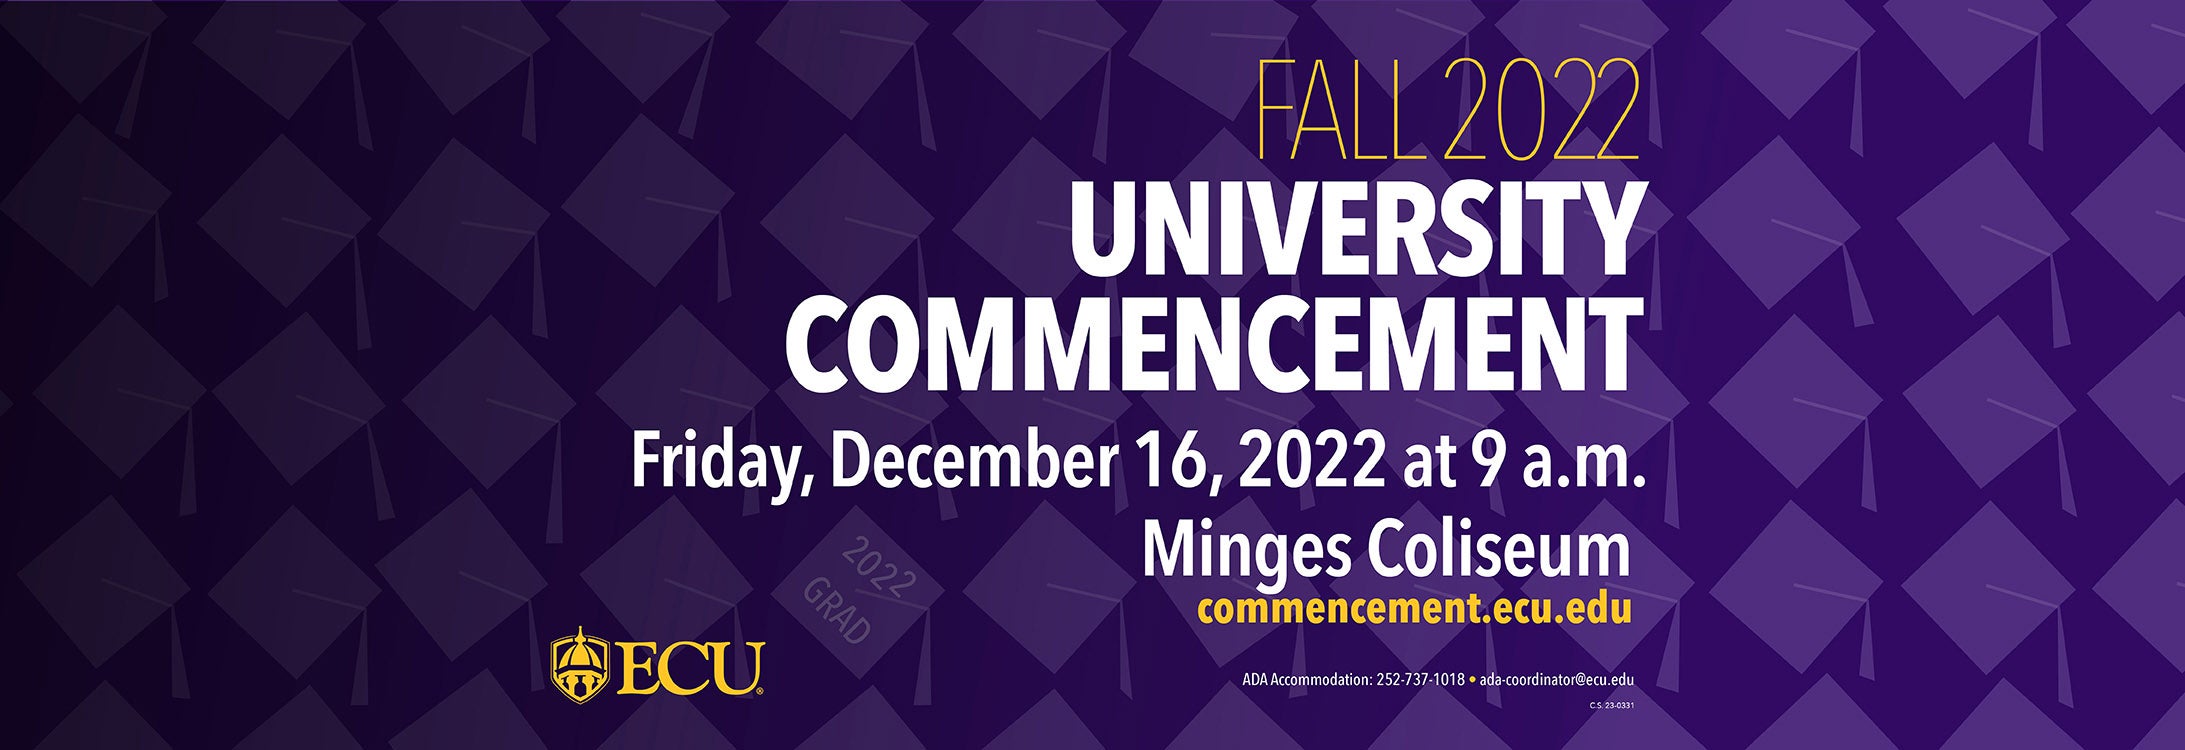 East Carolina University will host commencement on Friday, Dec. 16, at 9 a.m. in Williams Arena at Minges Coliseum to celebrate approximately 2,000 members of the fall Class of 2022.